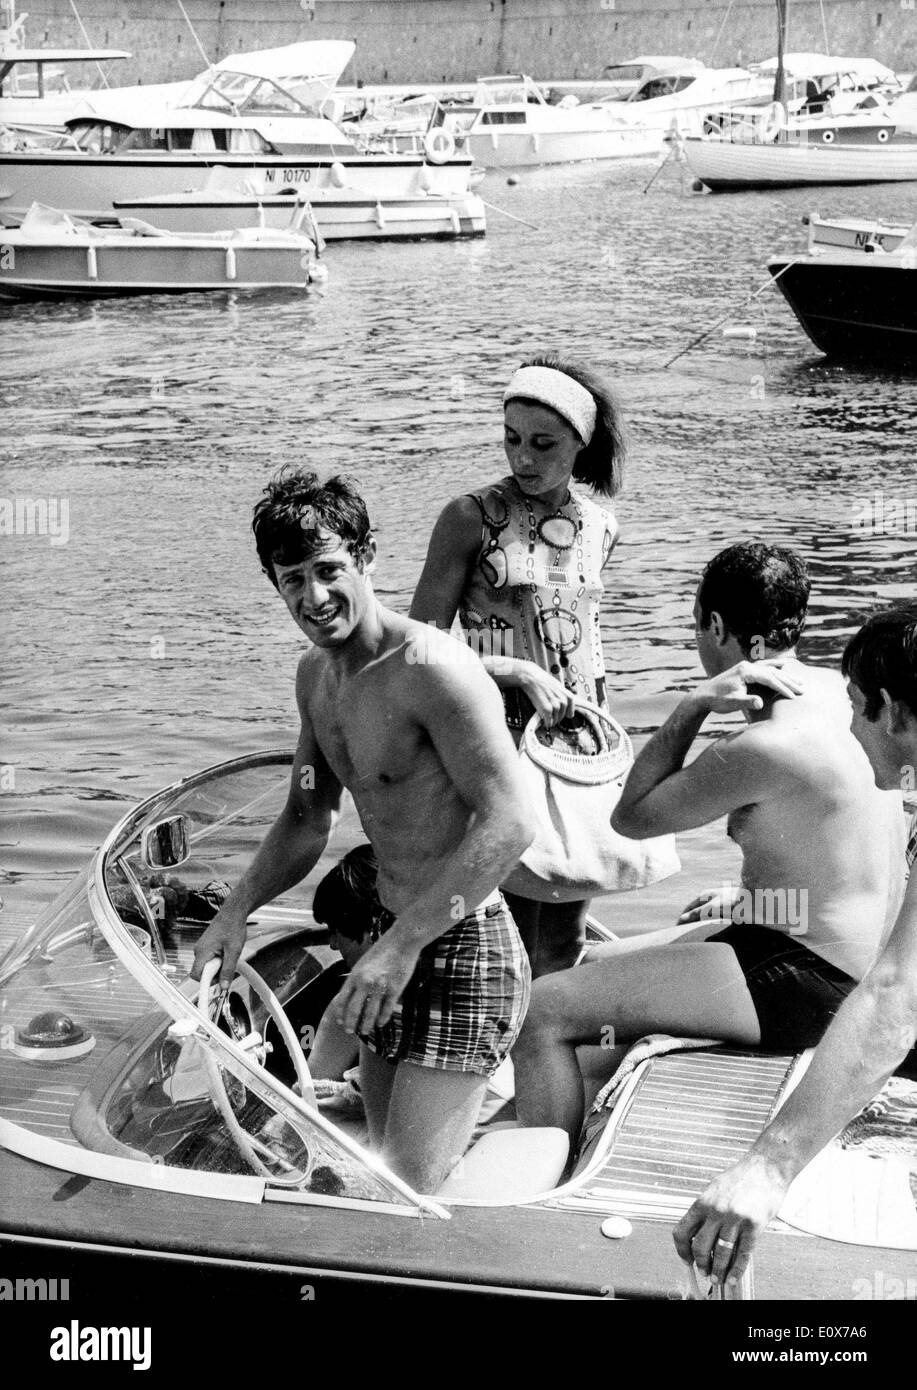 Actor Jean-Paul Belmondo goes boating with family Stock Photo